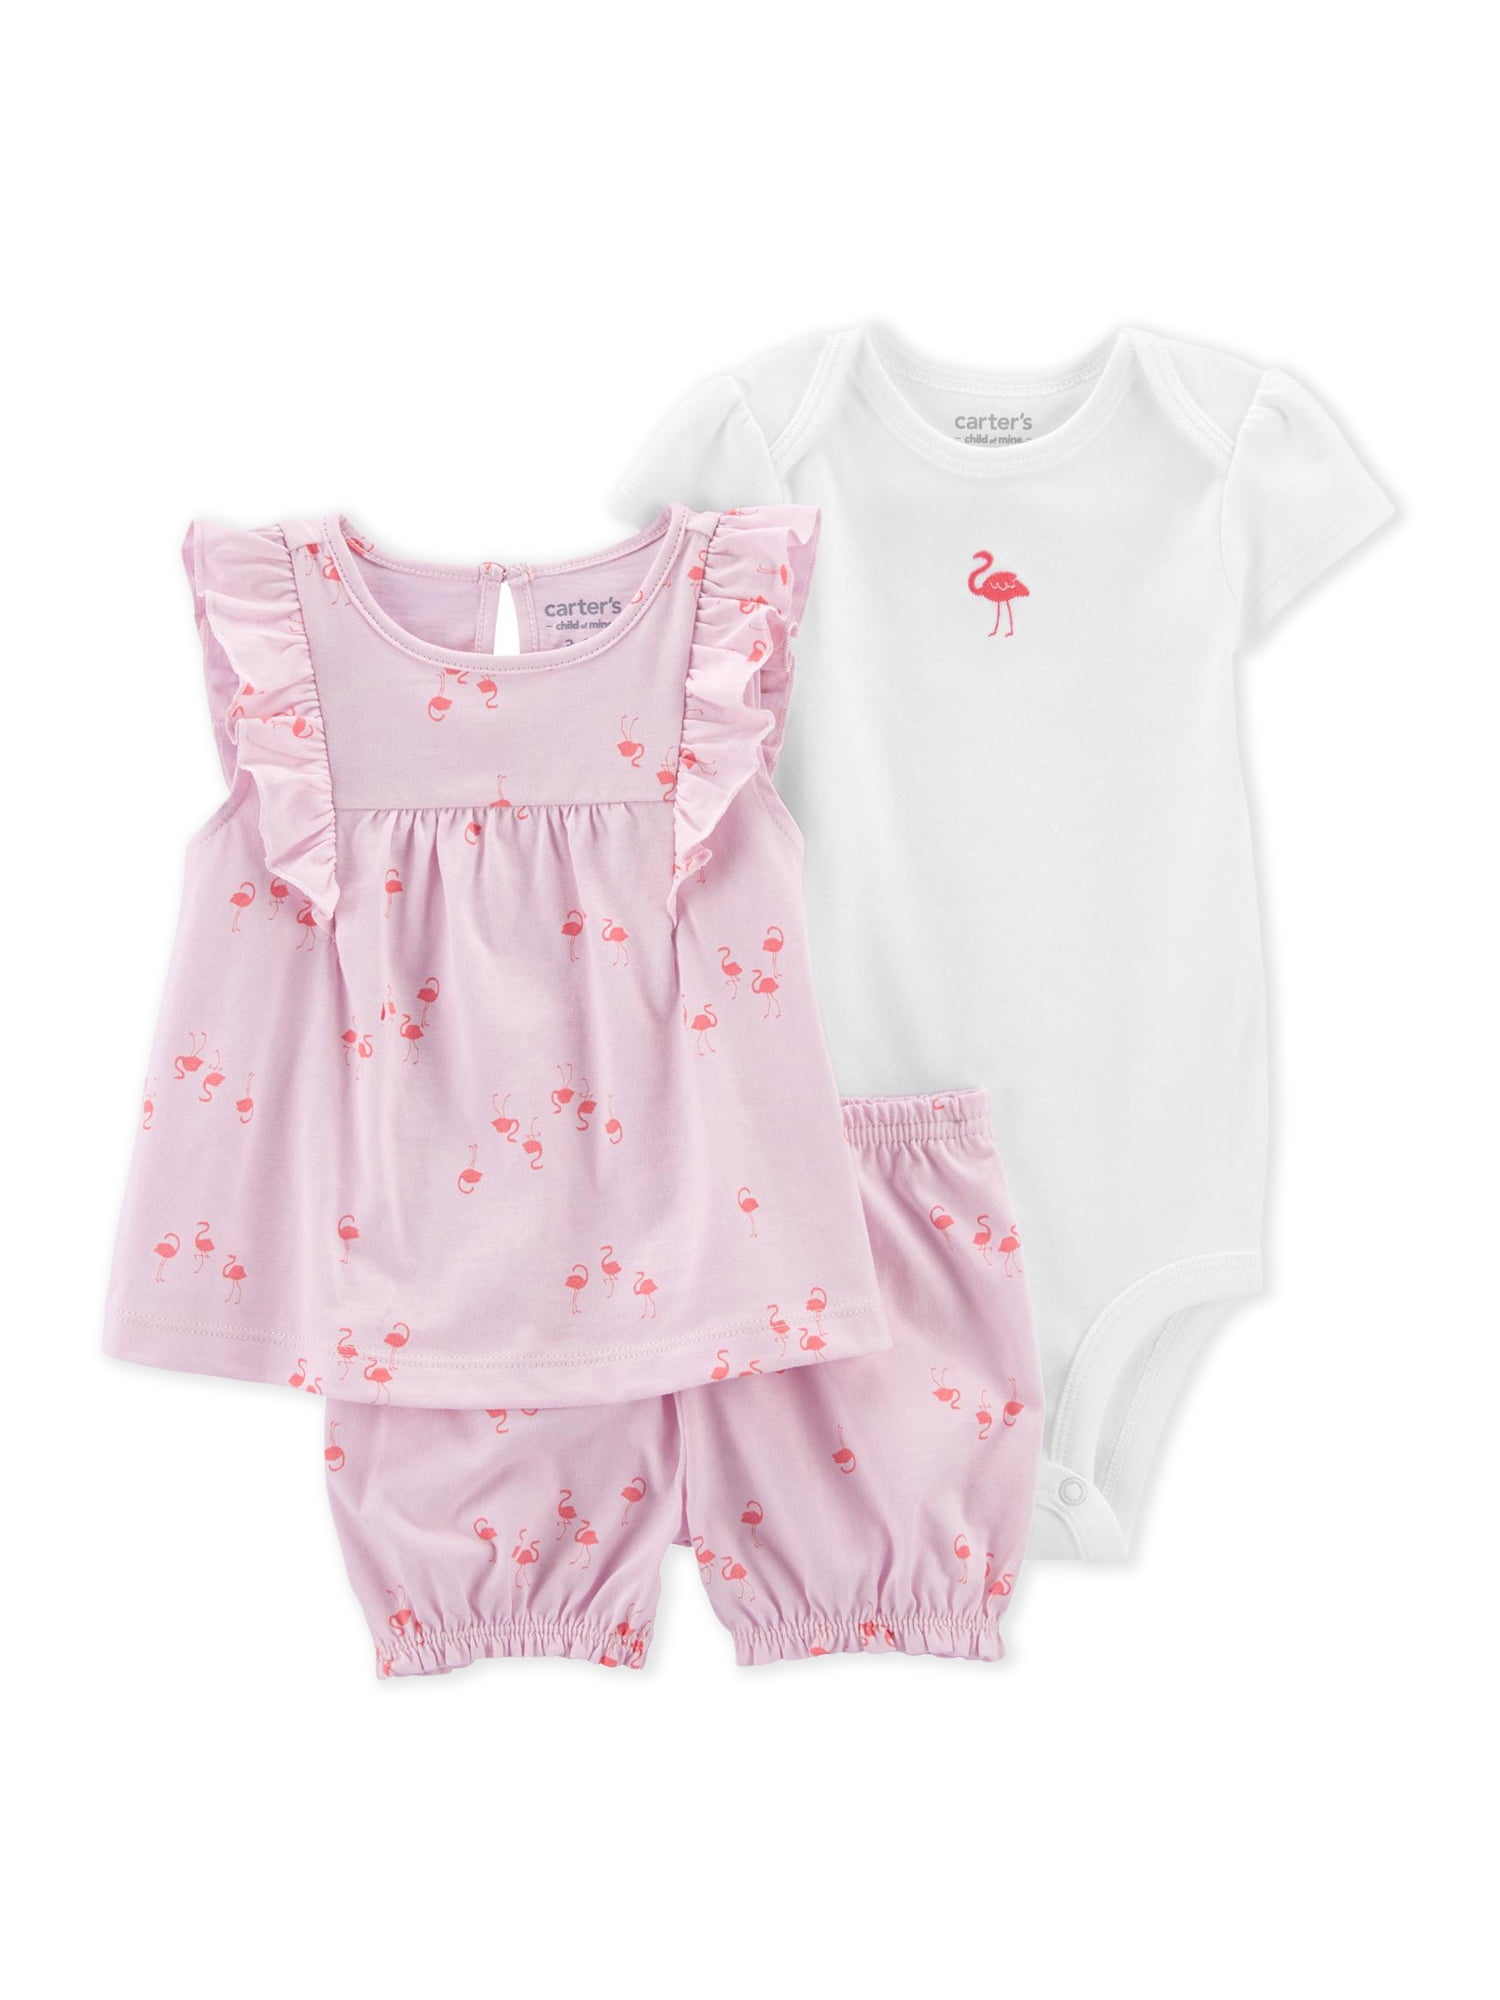 Carter's Child of Mine Baby Girl Romper and Dress Set, 3-Piece, Sizes 0-24  Months 